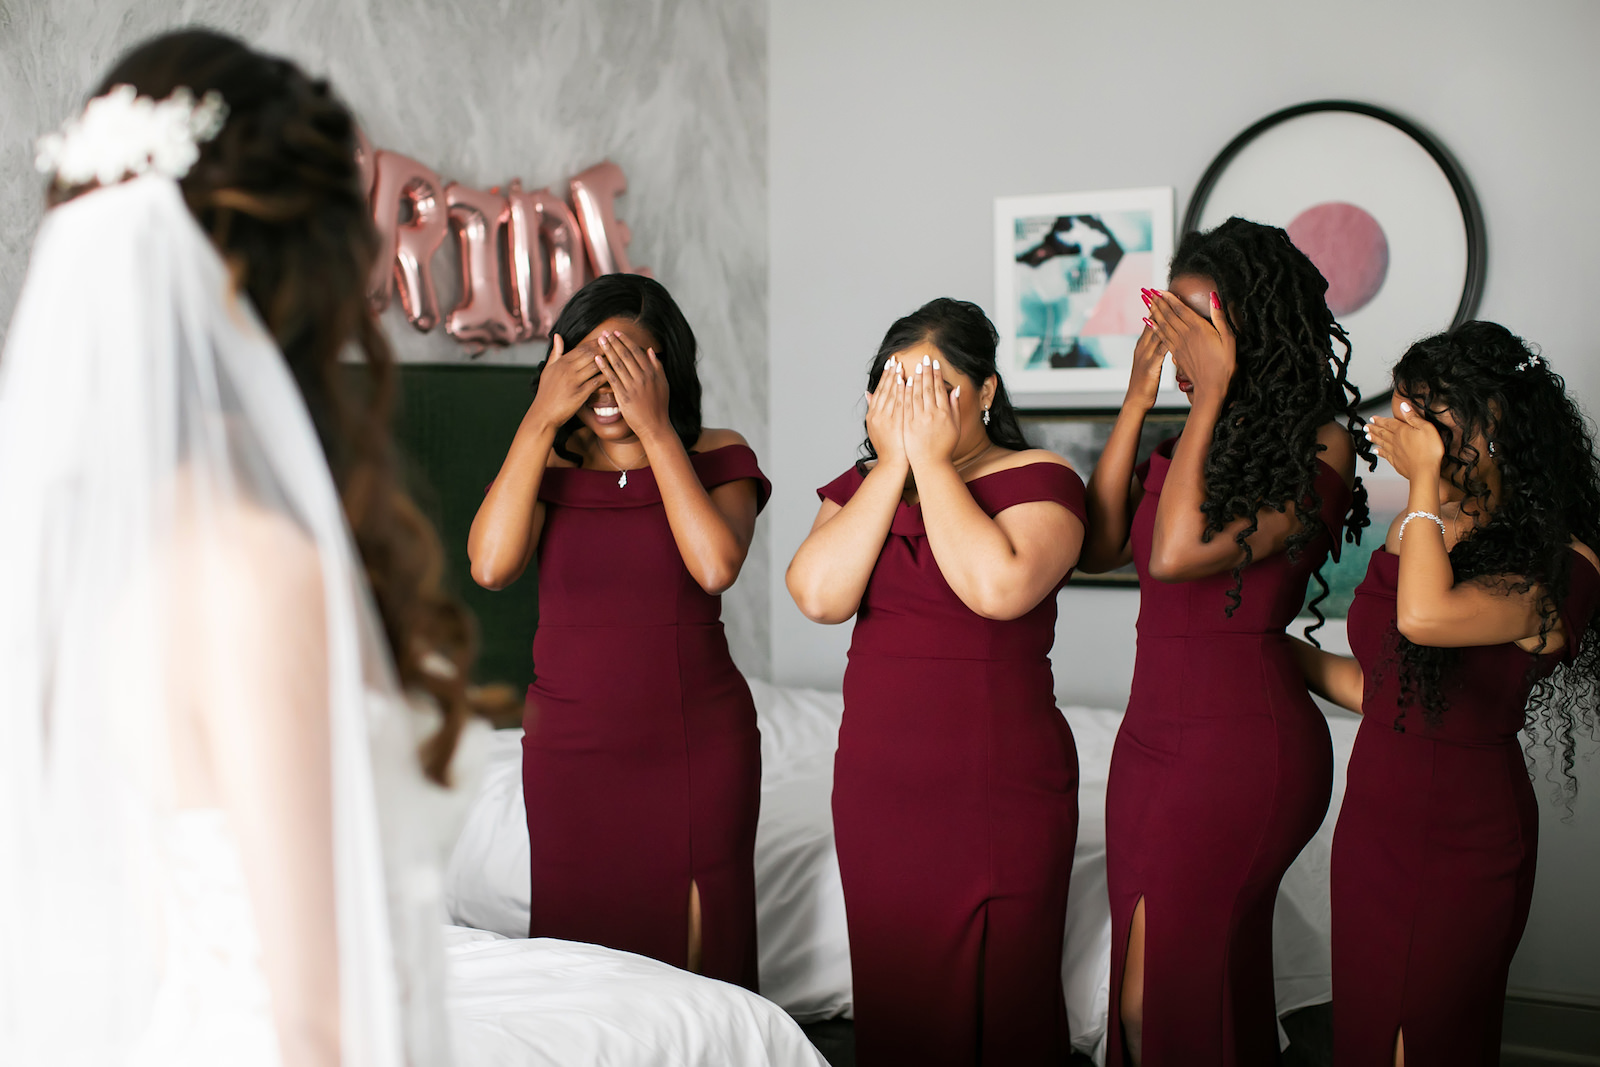 Bridesmaids Wearing Matching Off the Shoulder Burgundy Dresses First Look with Bride | Tampa Bay Wedding Photographer Limelight Photography | Wedding Hair and Makeup Femme Akoi Beauty Studio